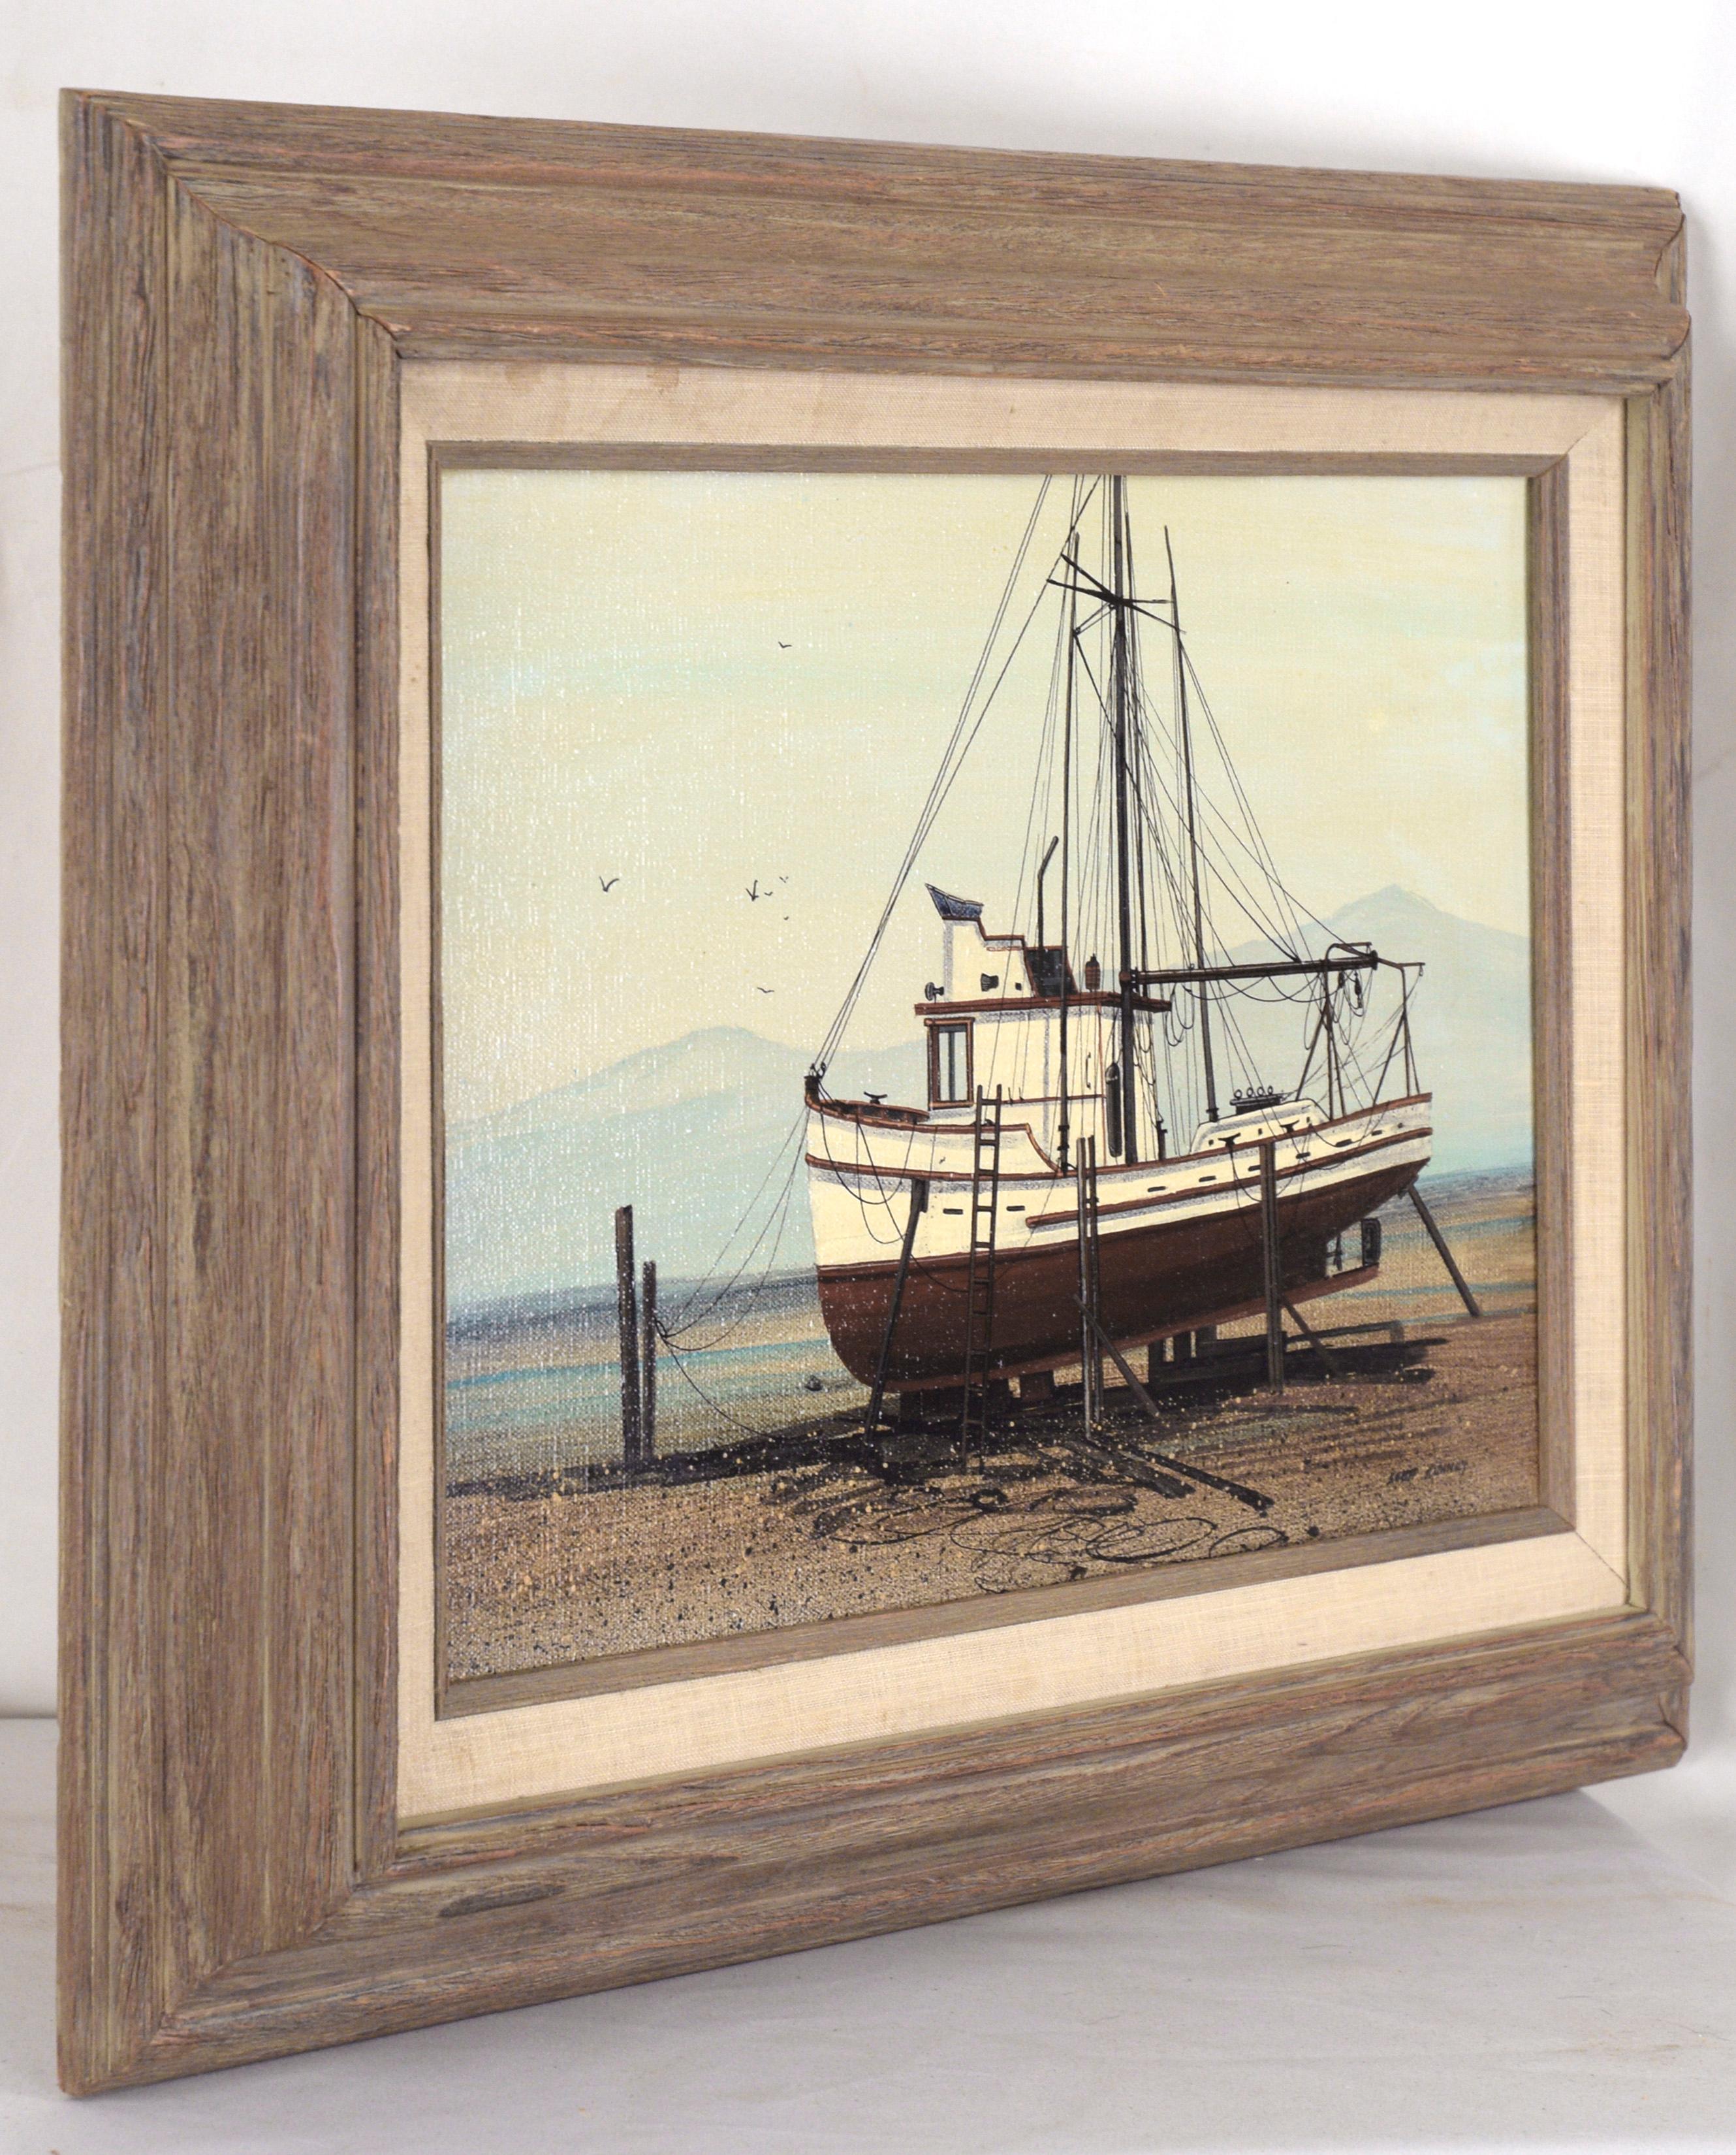 Fishing Boat in Dry Dock at the Shore - Oil on Canvas 4